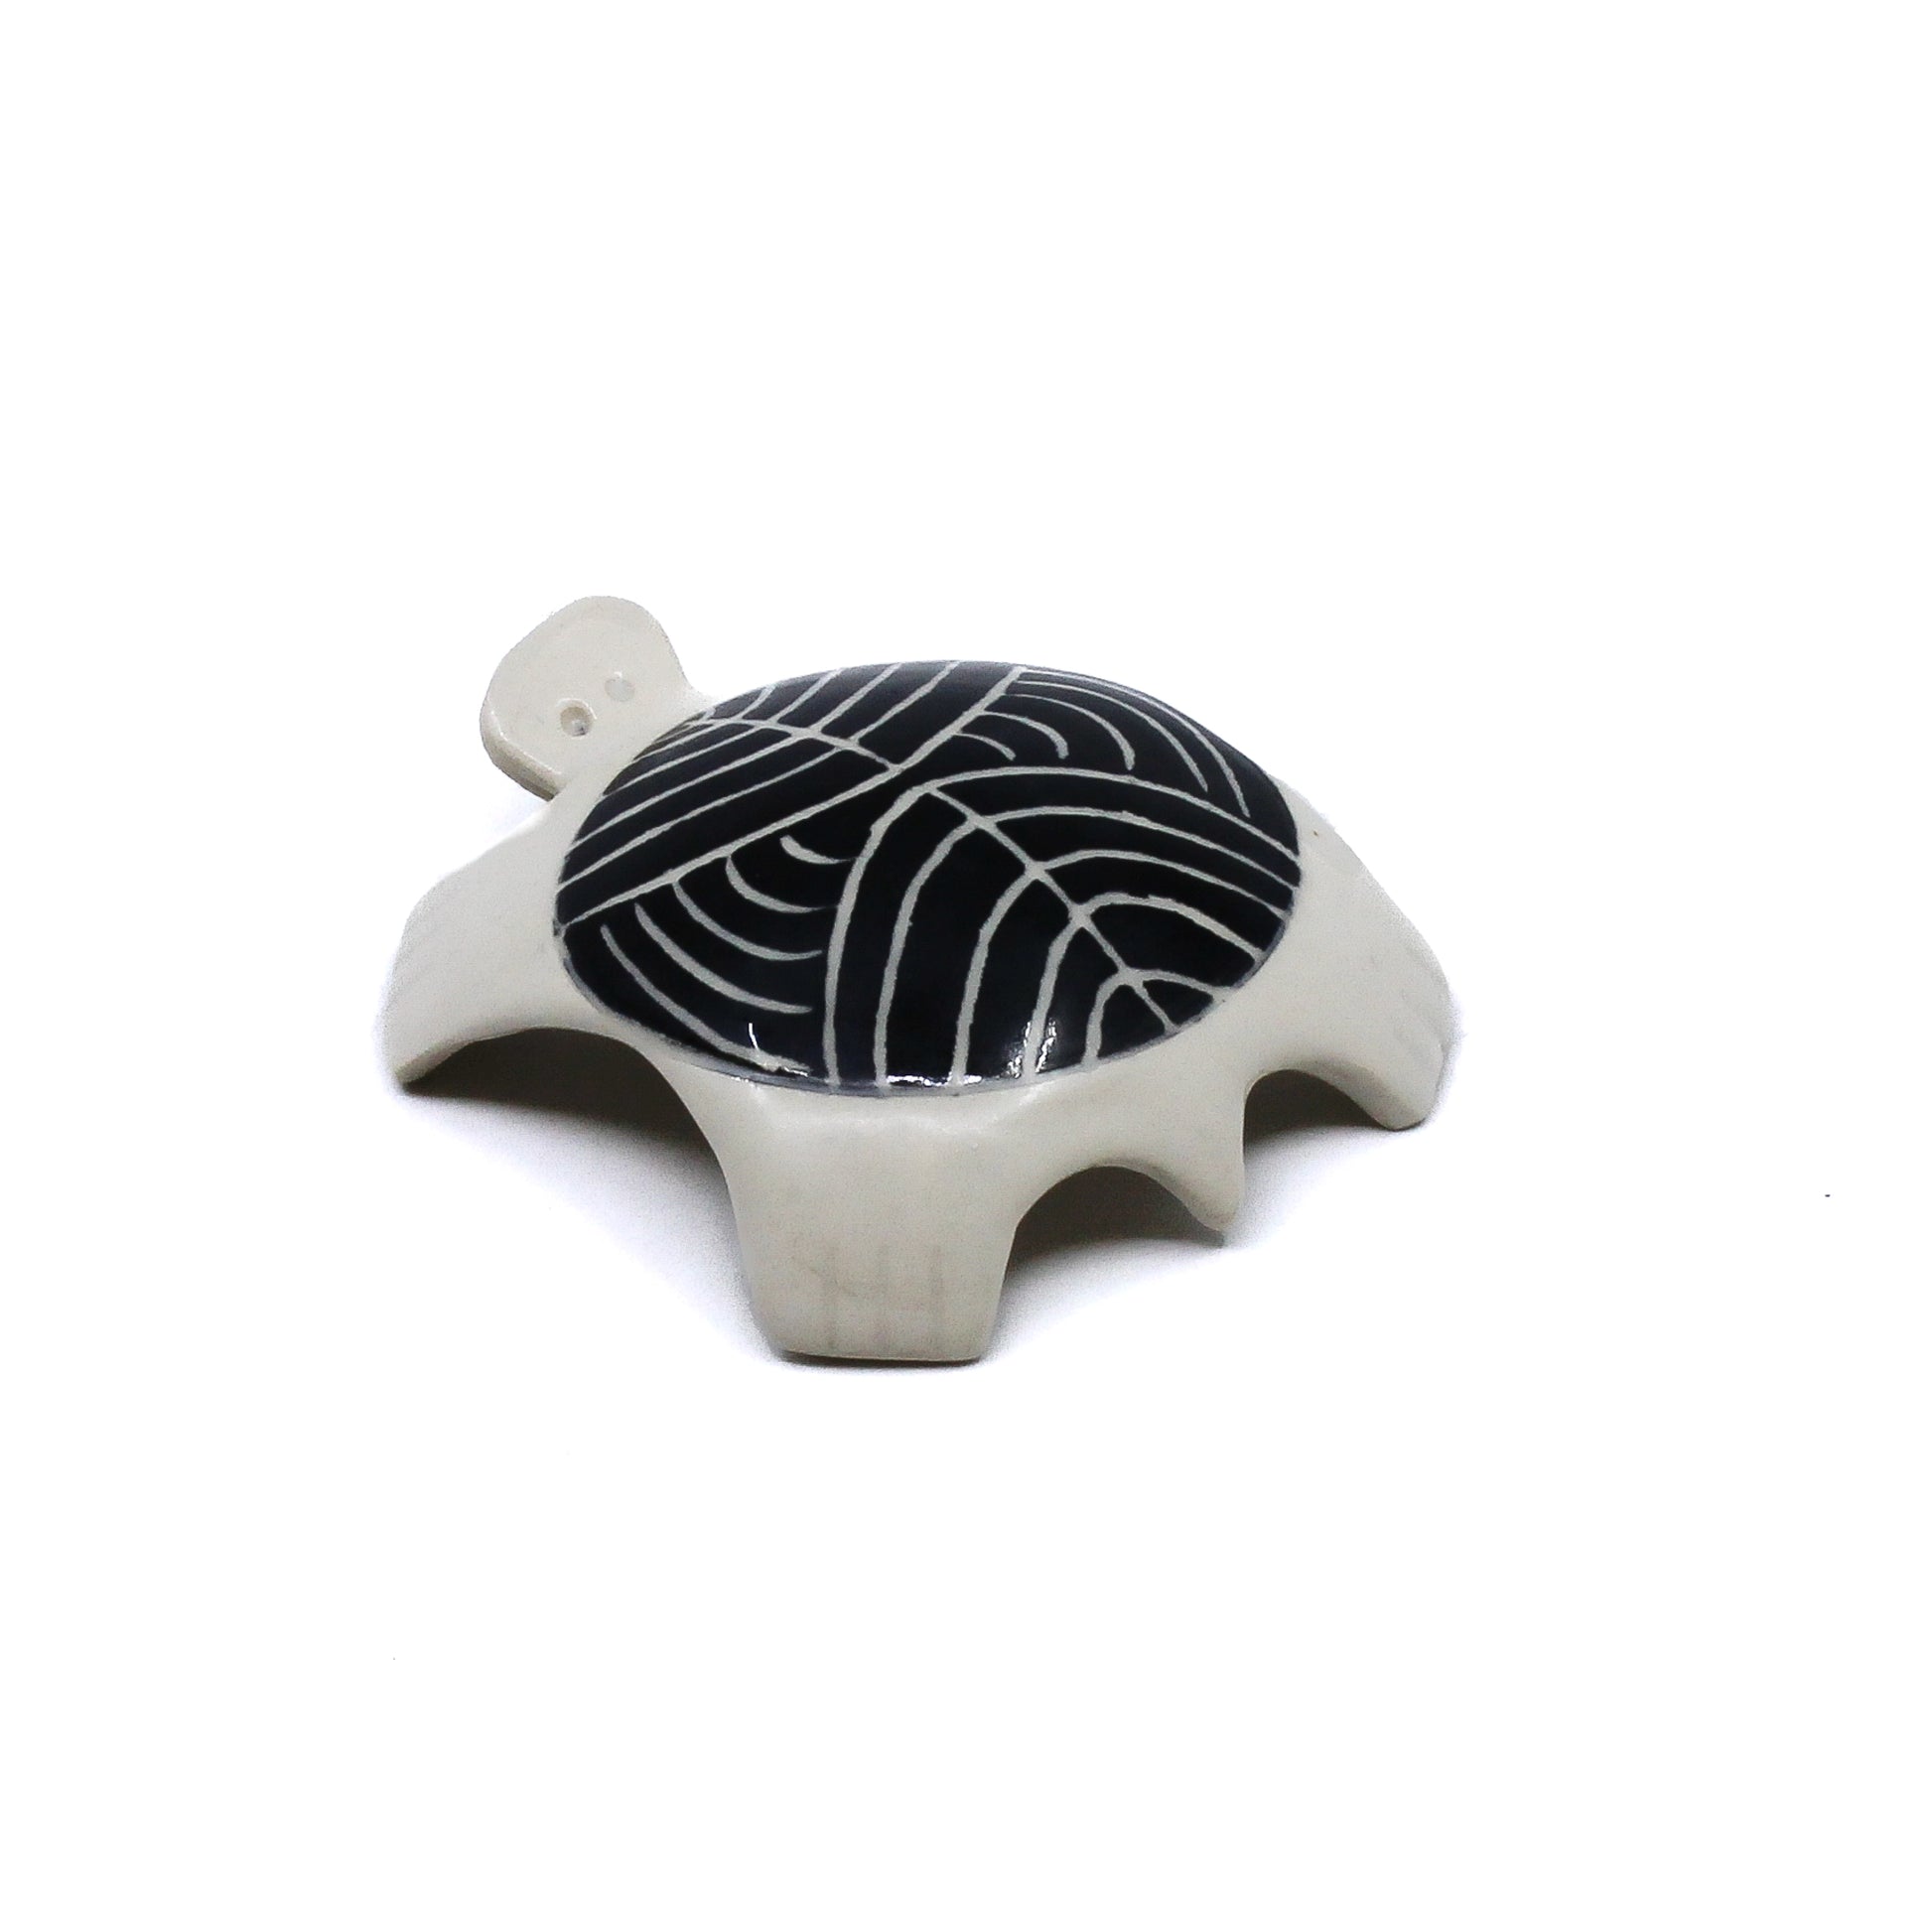 Clay turtle with black shell